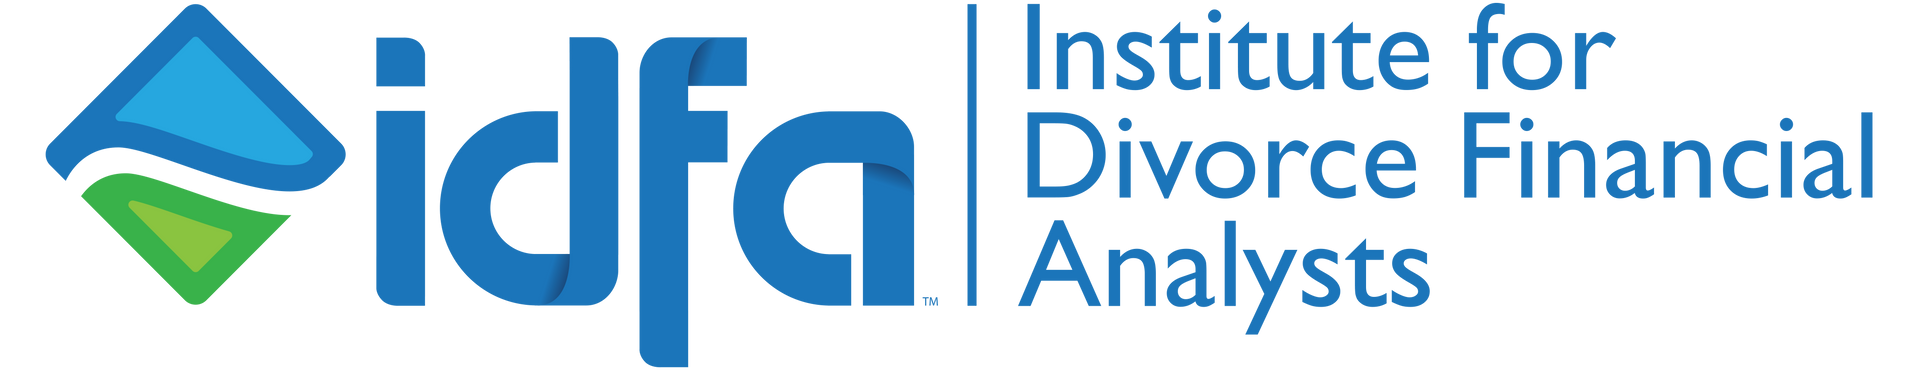 Institute for Divorce Financial Analysts Logo